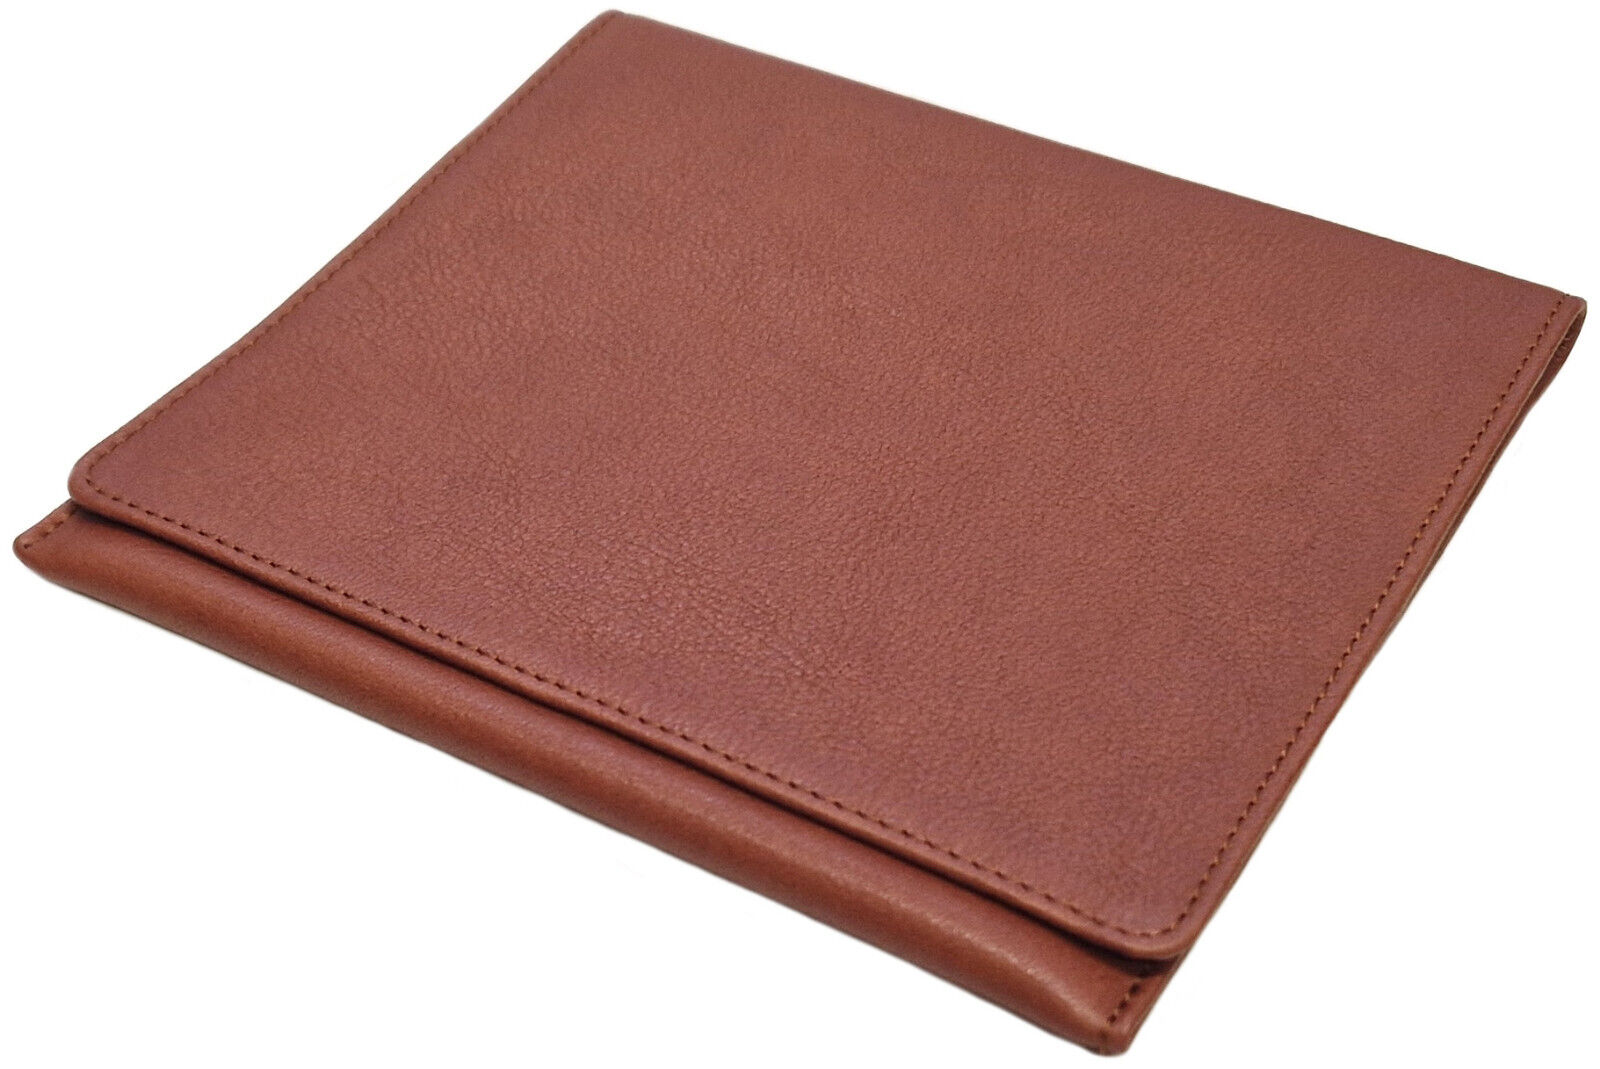 Dunhill 'The White Spot' Terracotta Roll Up Leather Tobacco Pouch (PA2020)